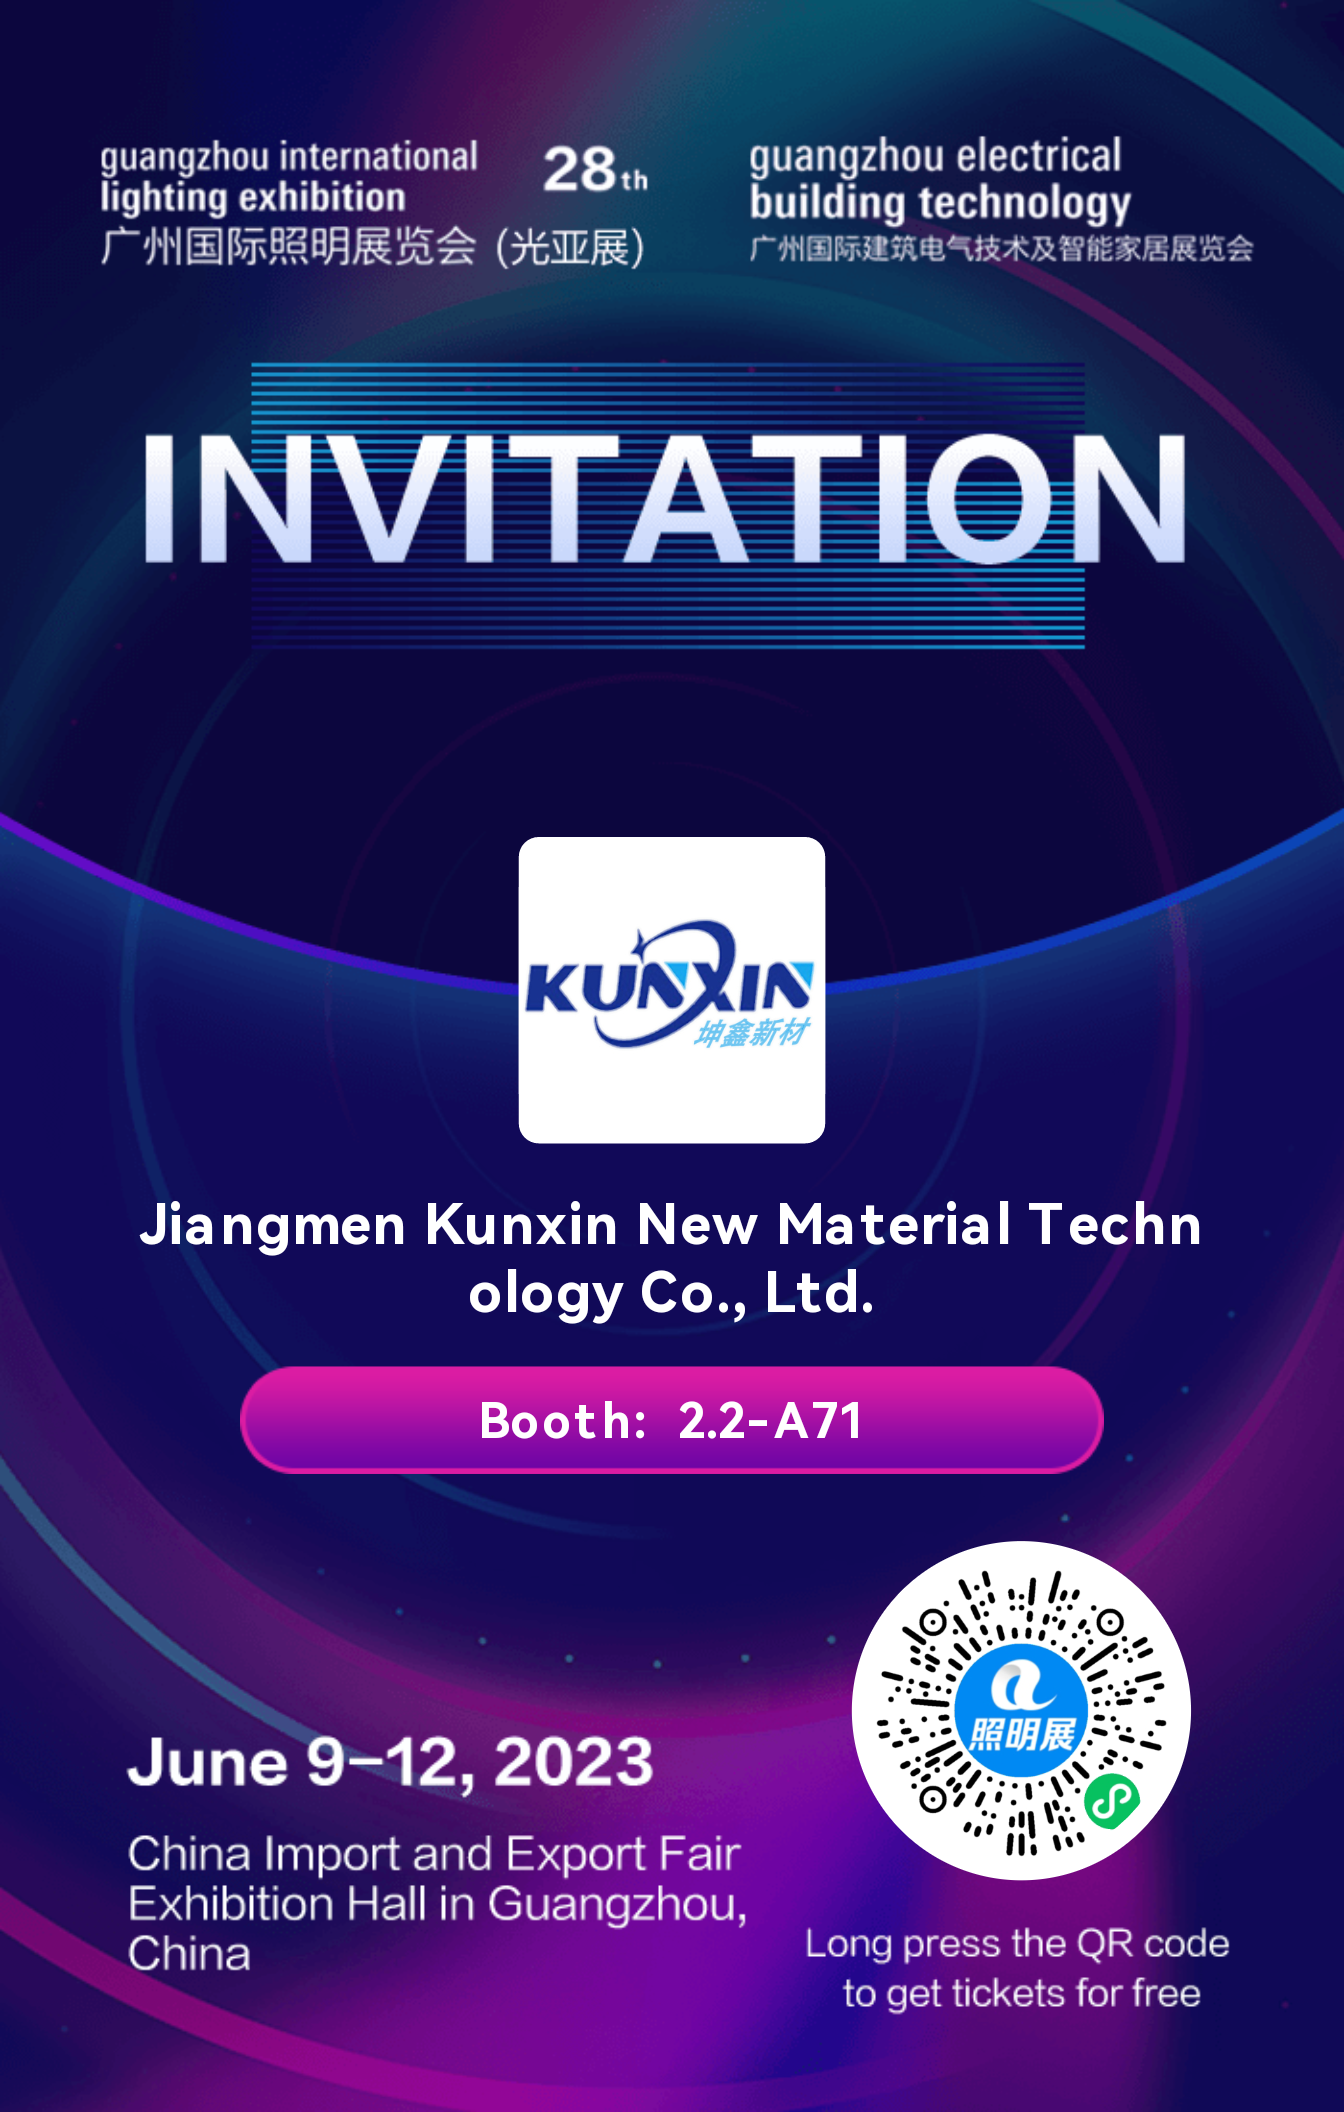 Jiangmen Kunxin New Material Technology Co., Ltd. is pleased to participate in the upcoming Guangzhou International Lighting Fair in 2023. 